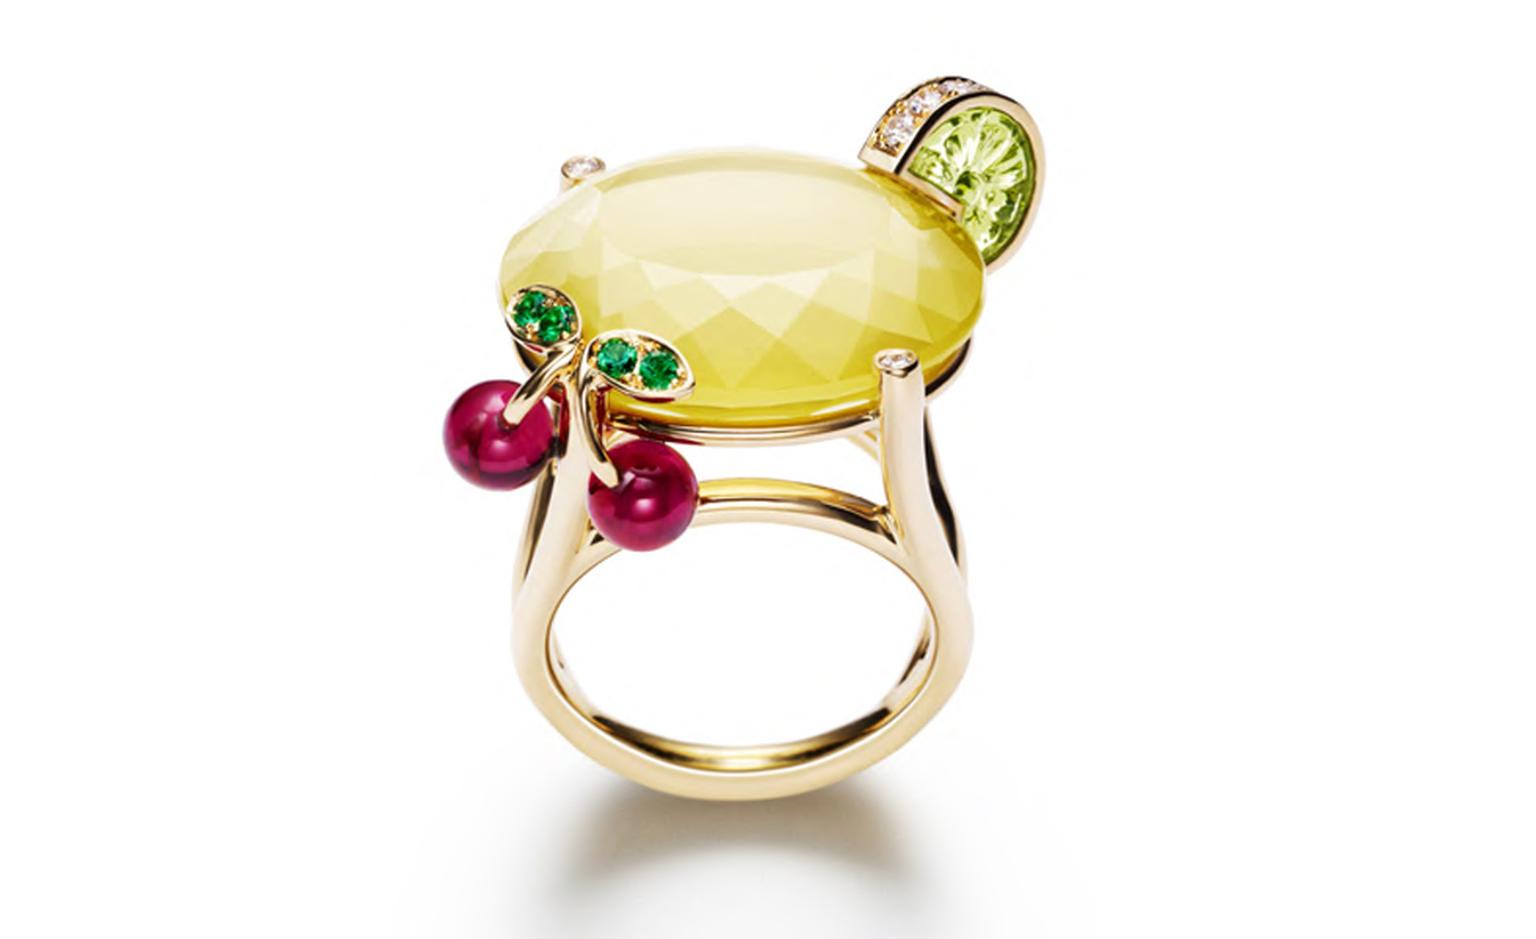 PIAGET, Limelight cocktail inspiration, Lemon Fizz ring, inspiration in white gold and diamonds, peridot, yellow quartz, emeralds and rubellites. POA